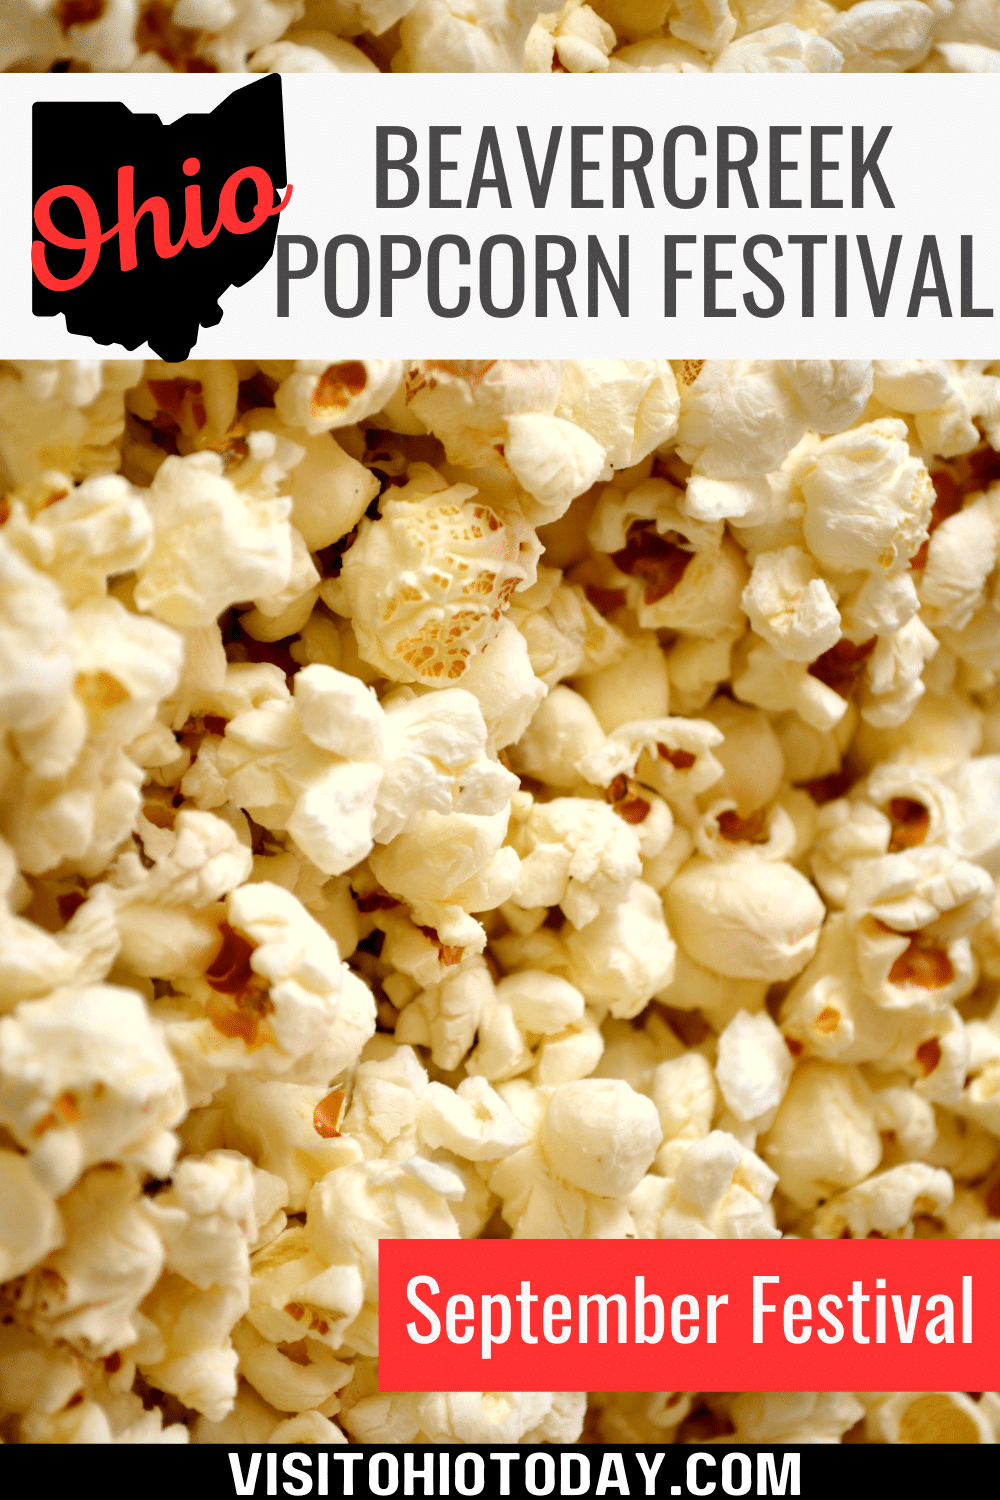 The Beavercreek Popcorn Festival is held on the weekend after Labor Day in Beavercreek. It’s all about the popcorn! But there are also a lot of other great activities and events for all the family throughout this two-day festival.